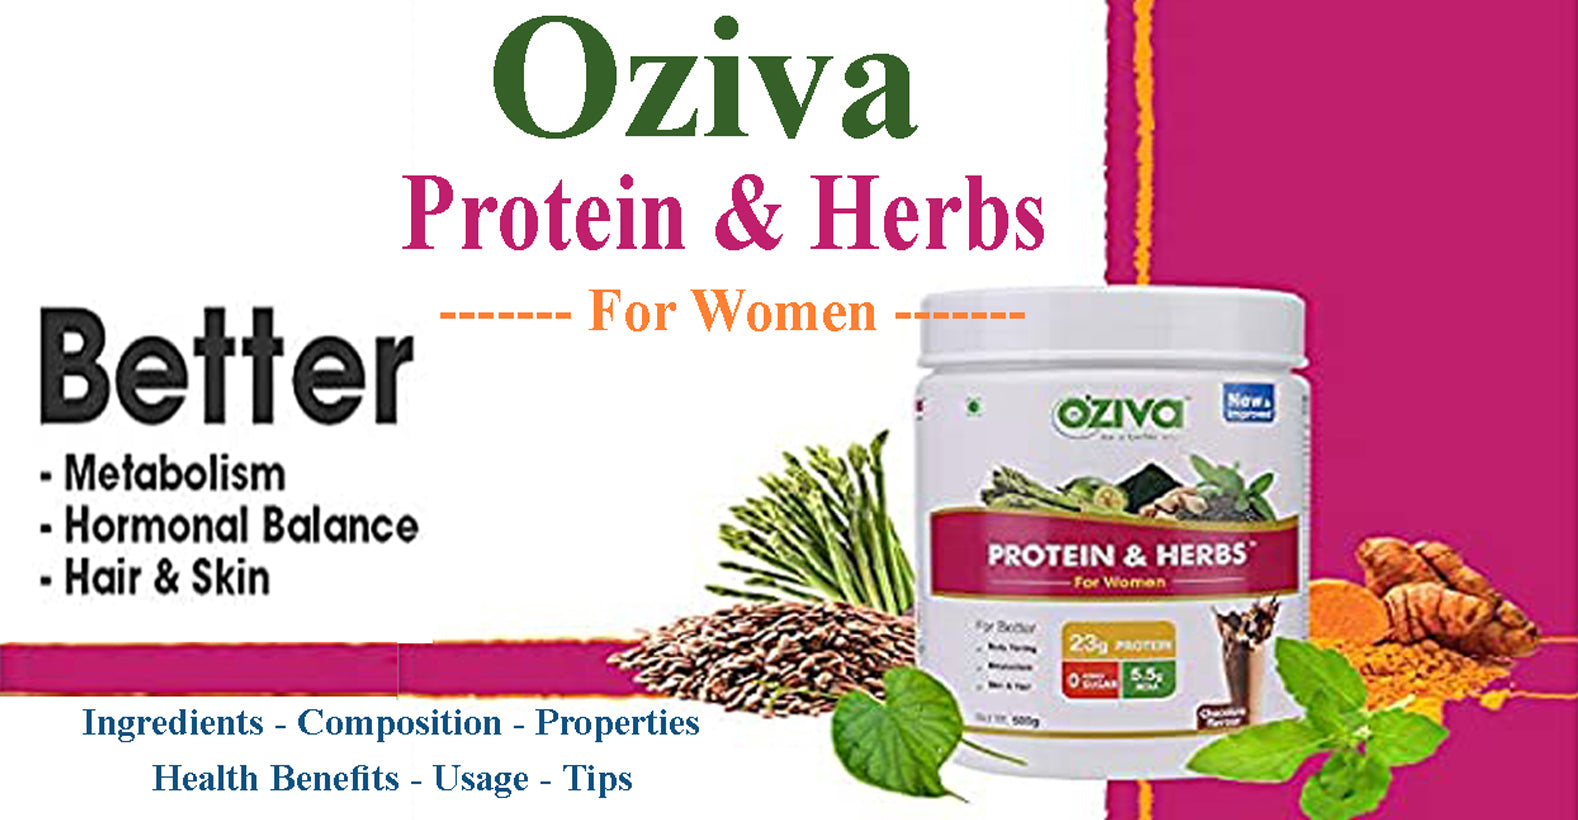 OZiva Protein & Herbs For Women - Ingredients, Composition, Properties, Health Benefits, Usage, Tips